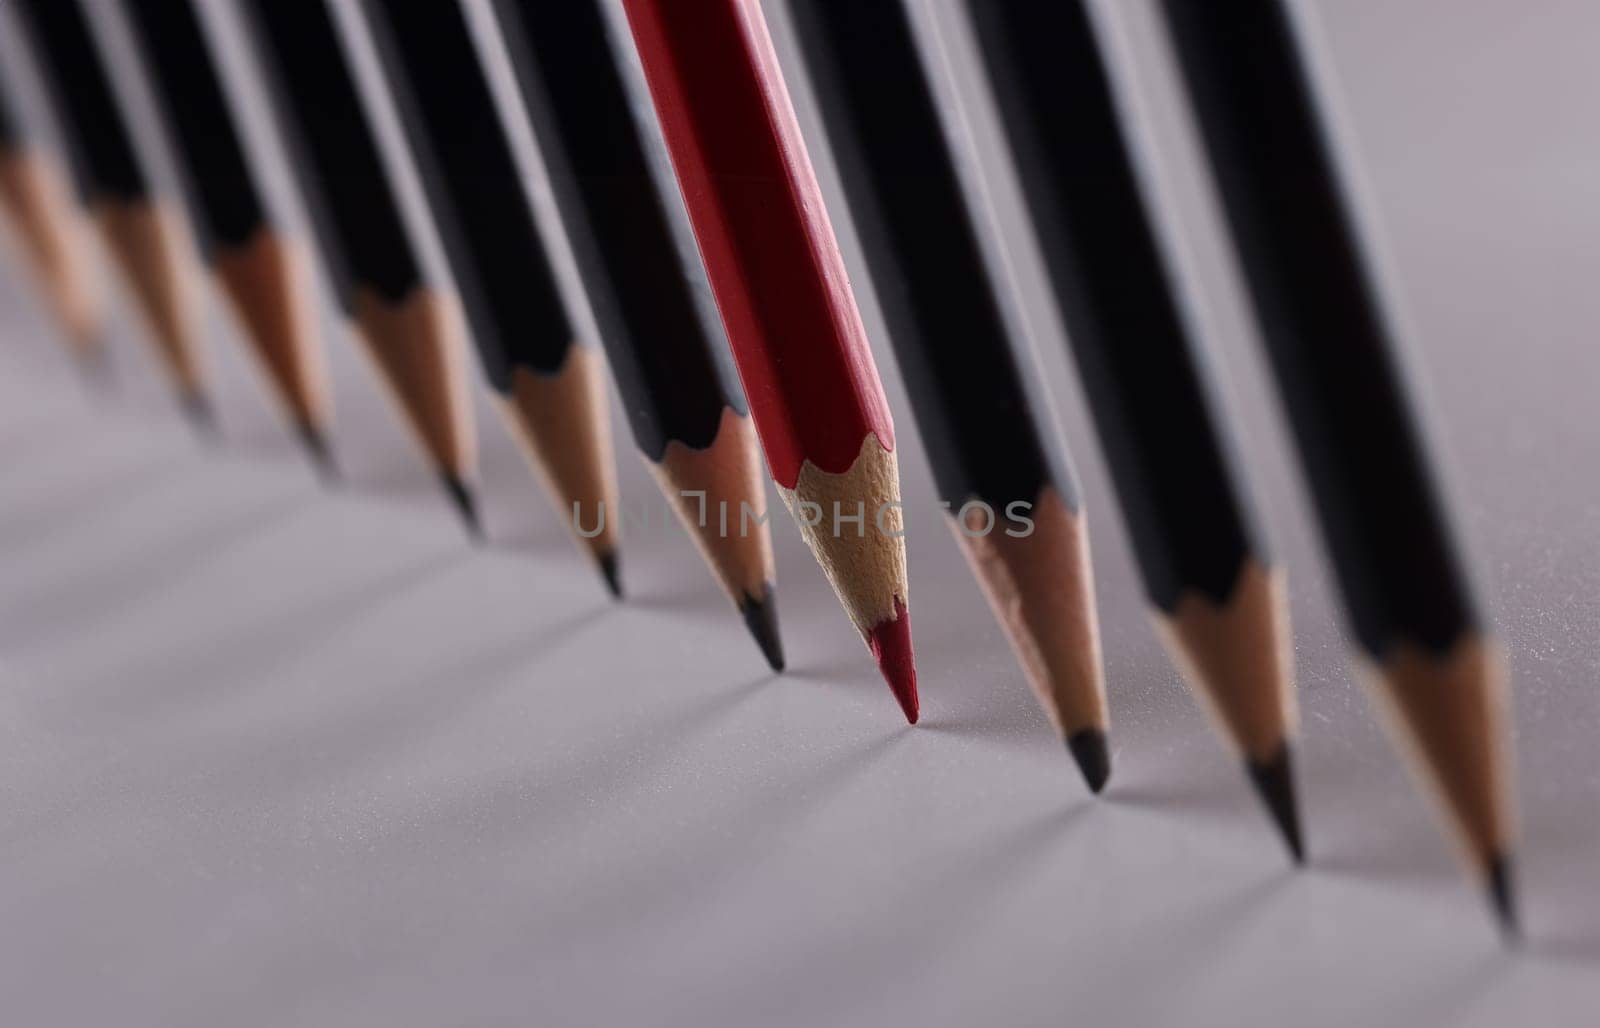 One red pencil is set of identical black counterparts. Uniqueness of business ideas and creative creative approach